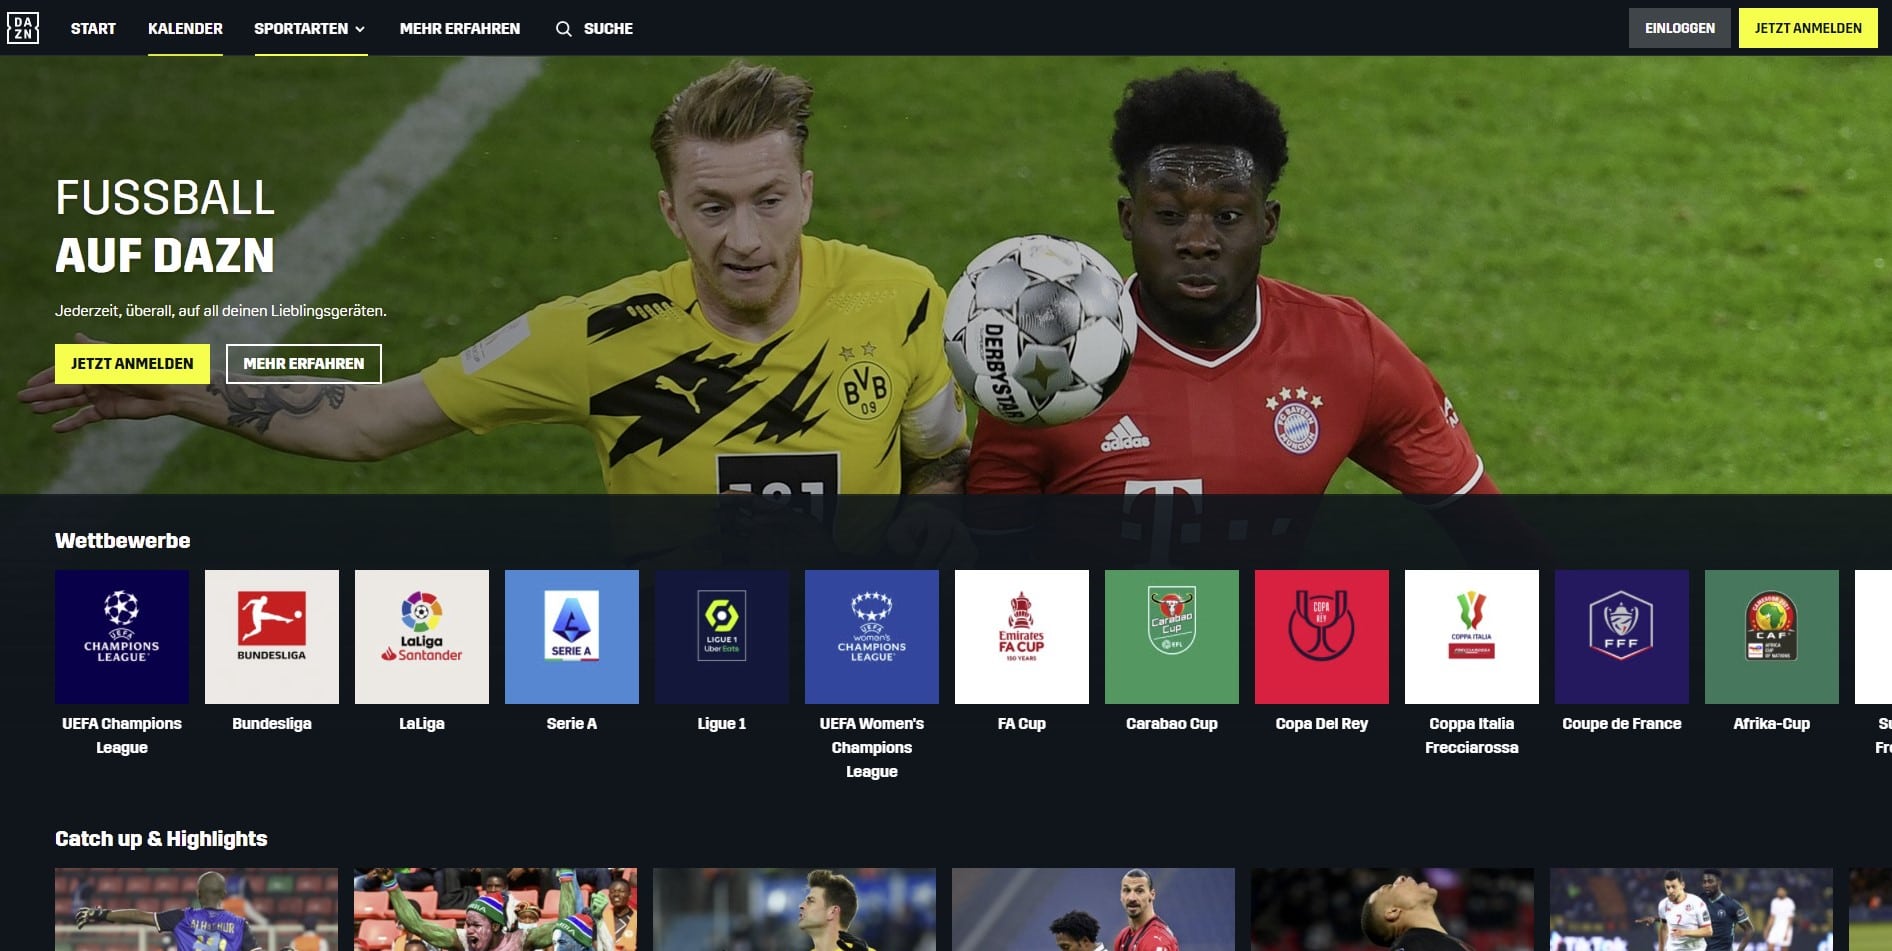 Sky competitor: Dazn streams football games in full HD and probably increases the prices